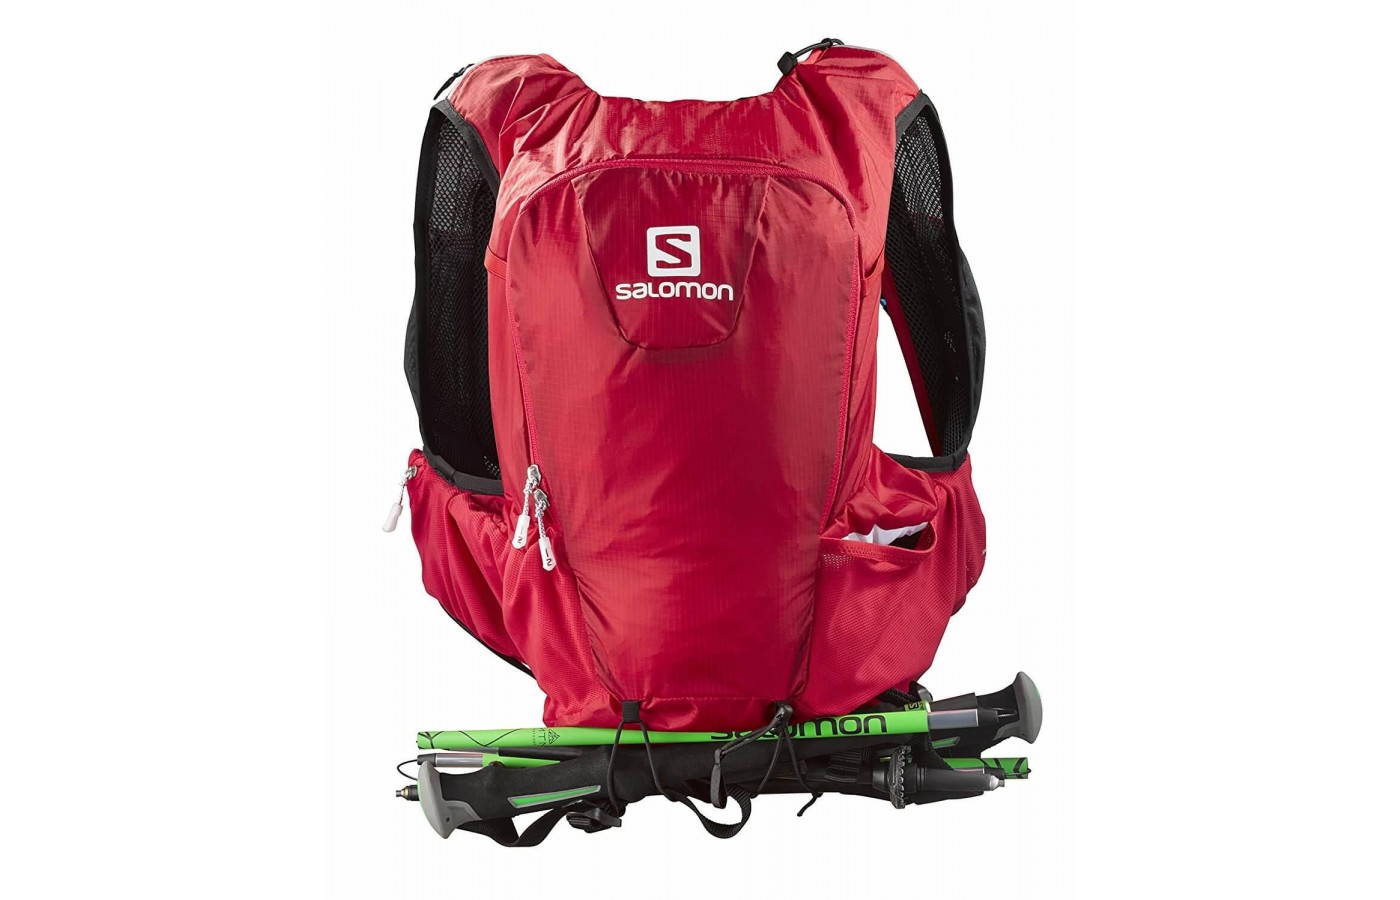 The Salomon Skin Pro 15 can store many accessories